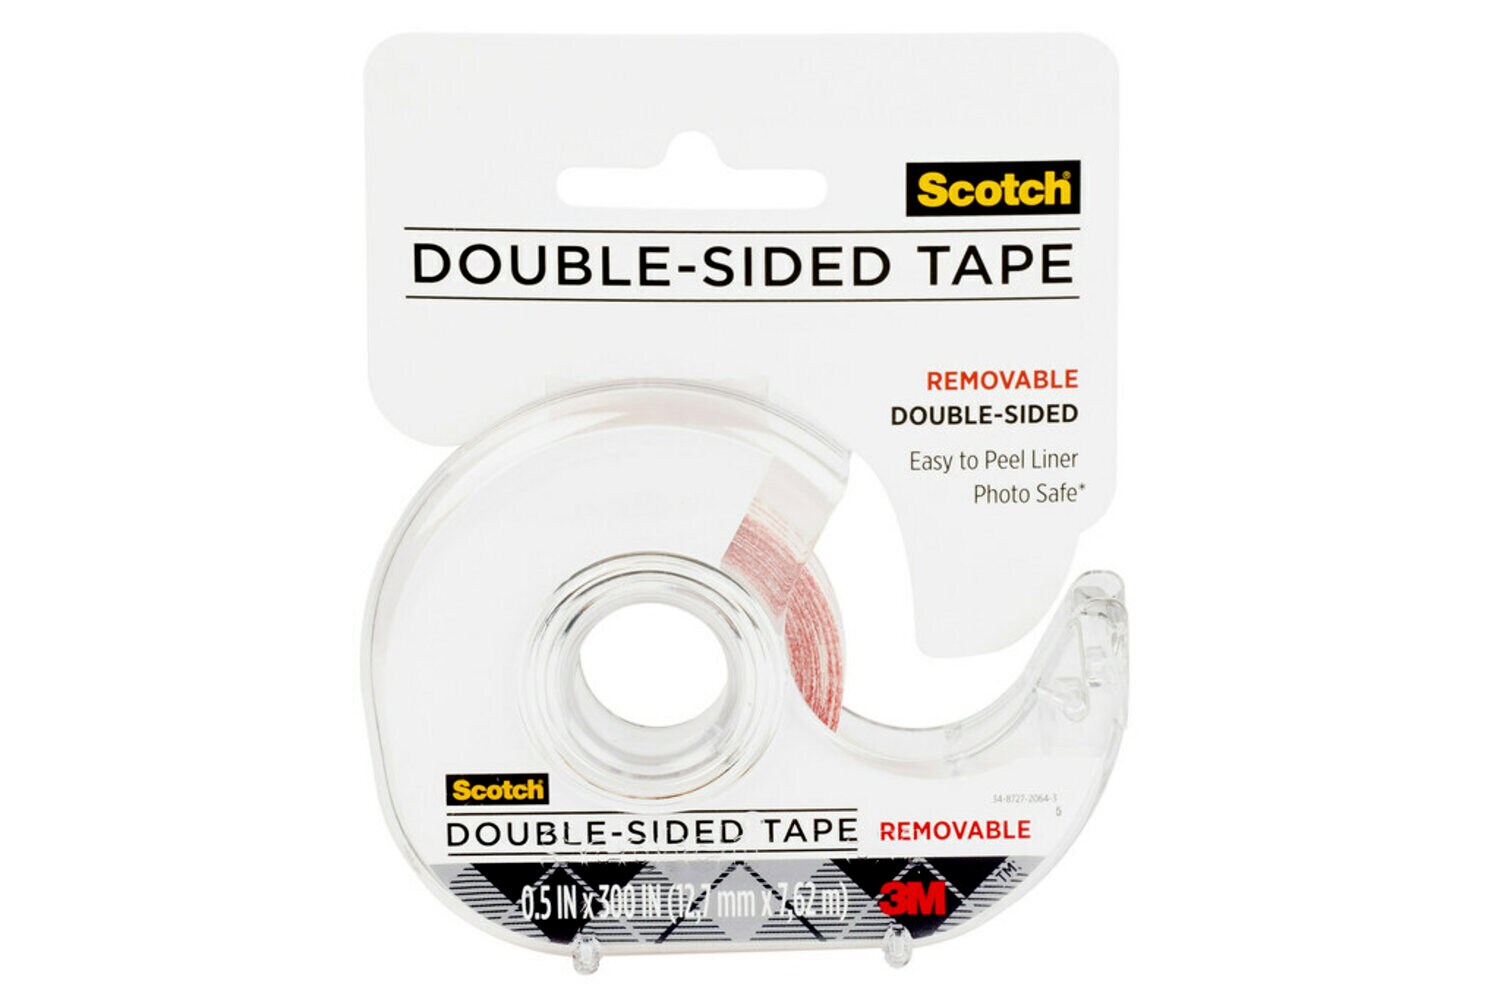 7010311495 - Scotch Tape Double Sided Removable 2002-CFT, 1/2 in x 300 in